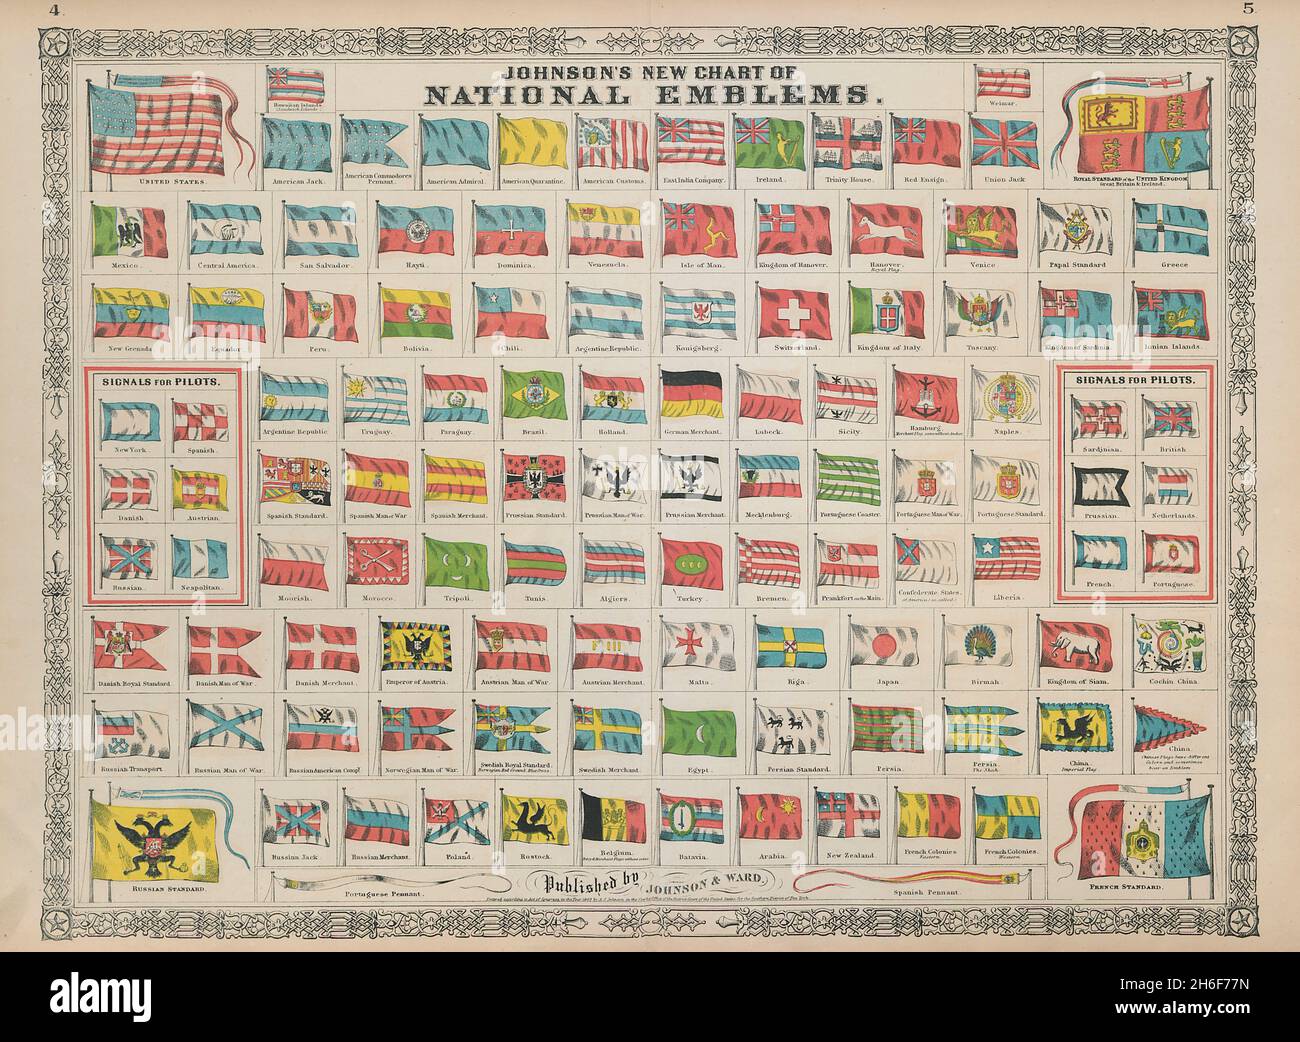 Johnson's New Chart of National Emblems. Flags of the World 1865 old print Stock Photo